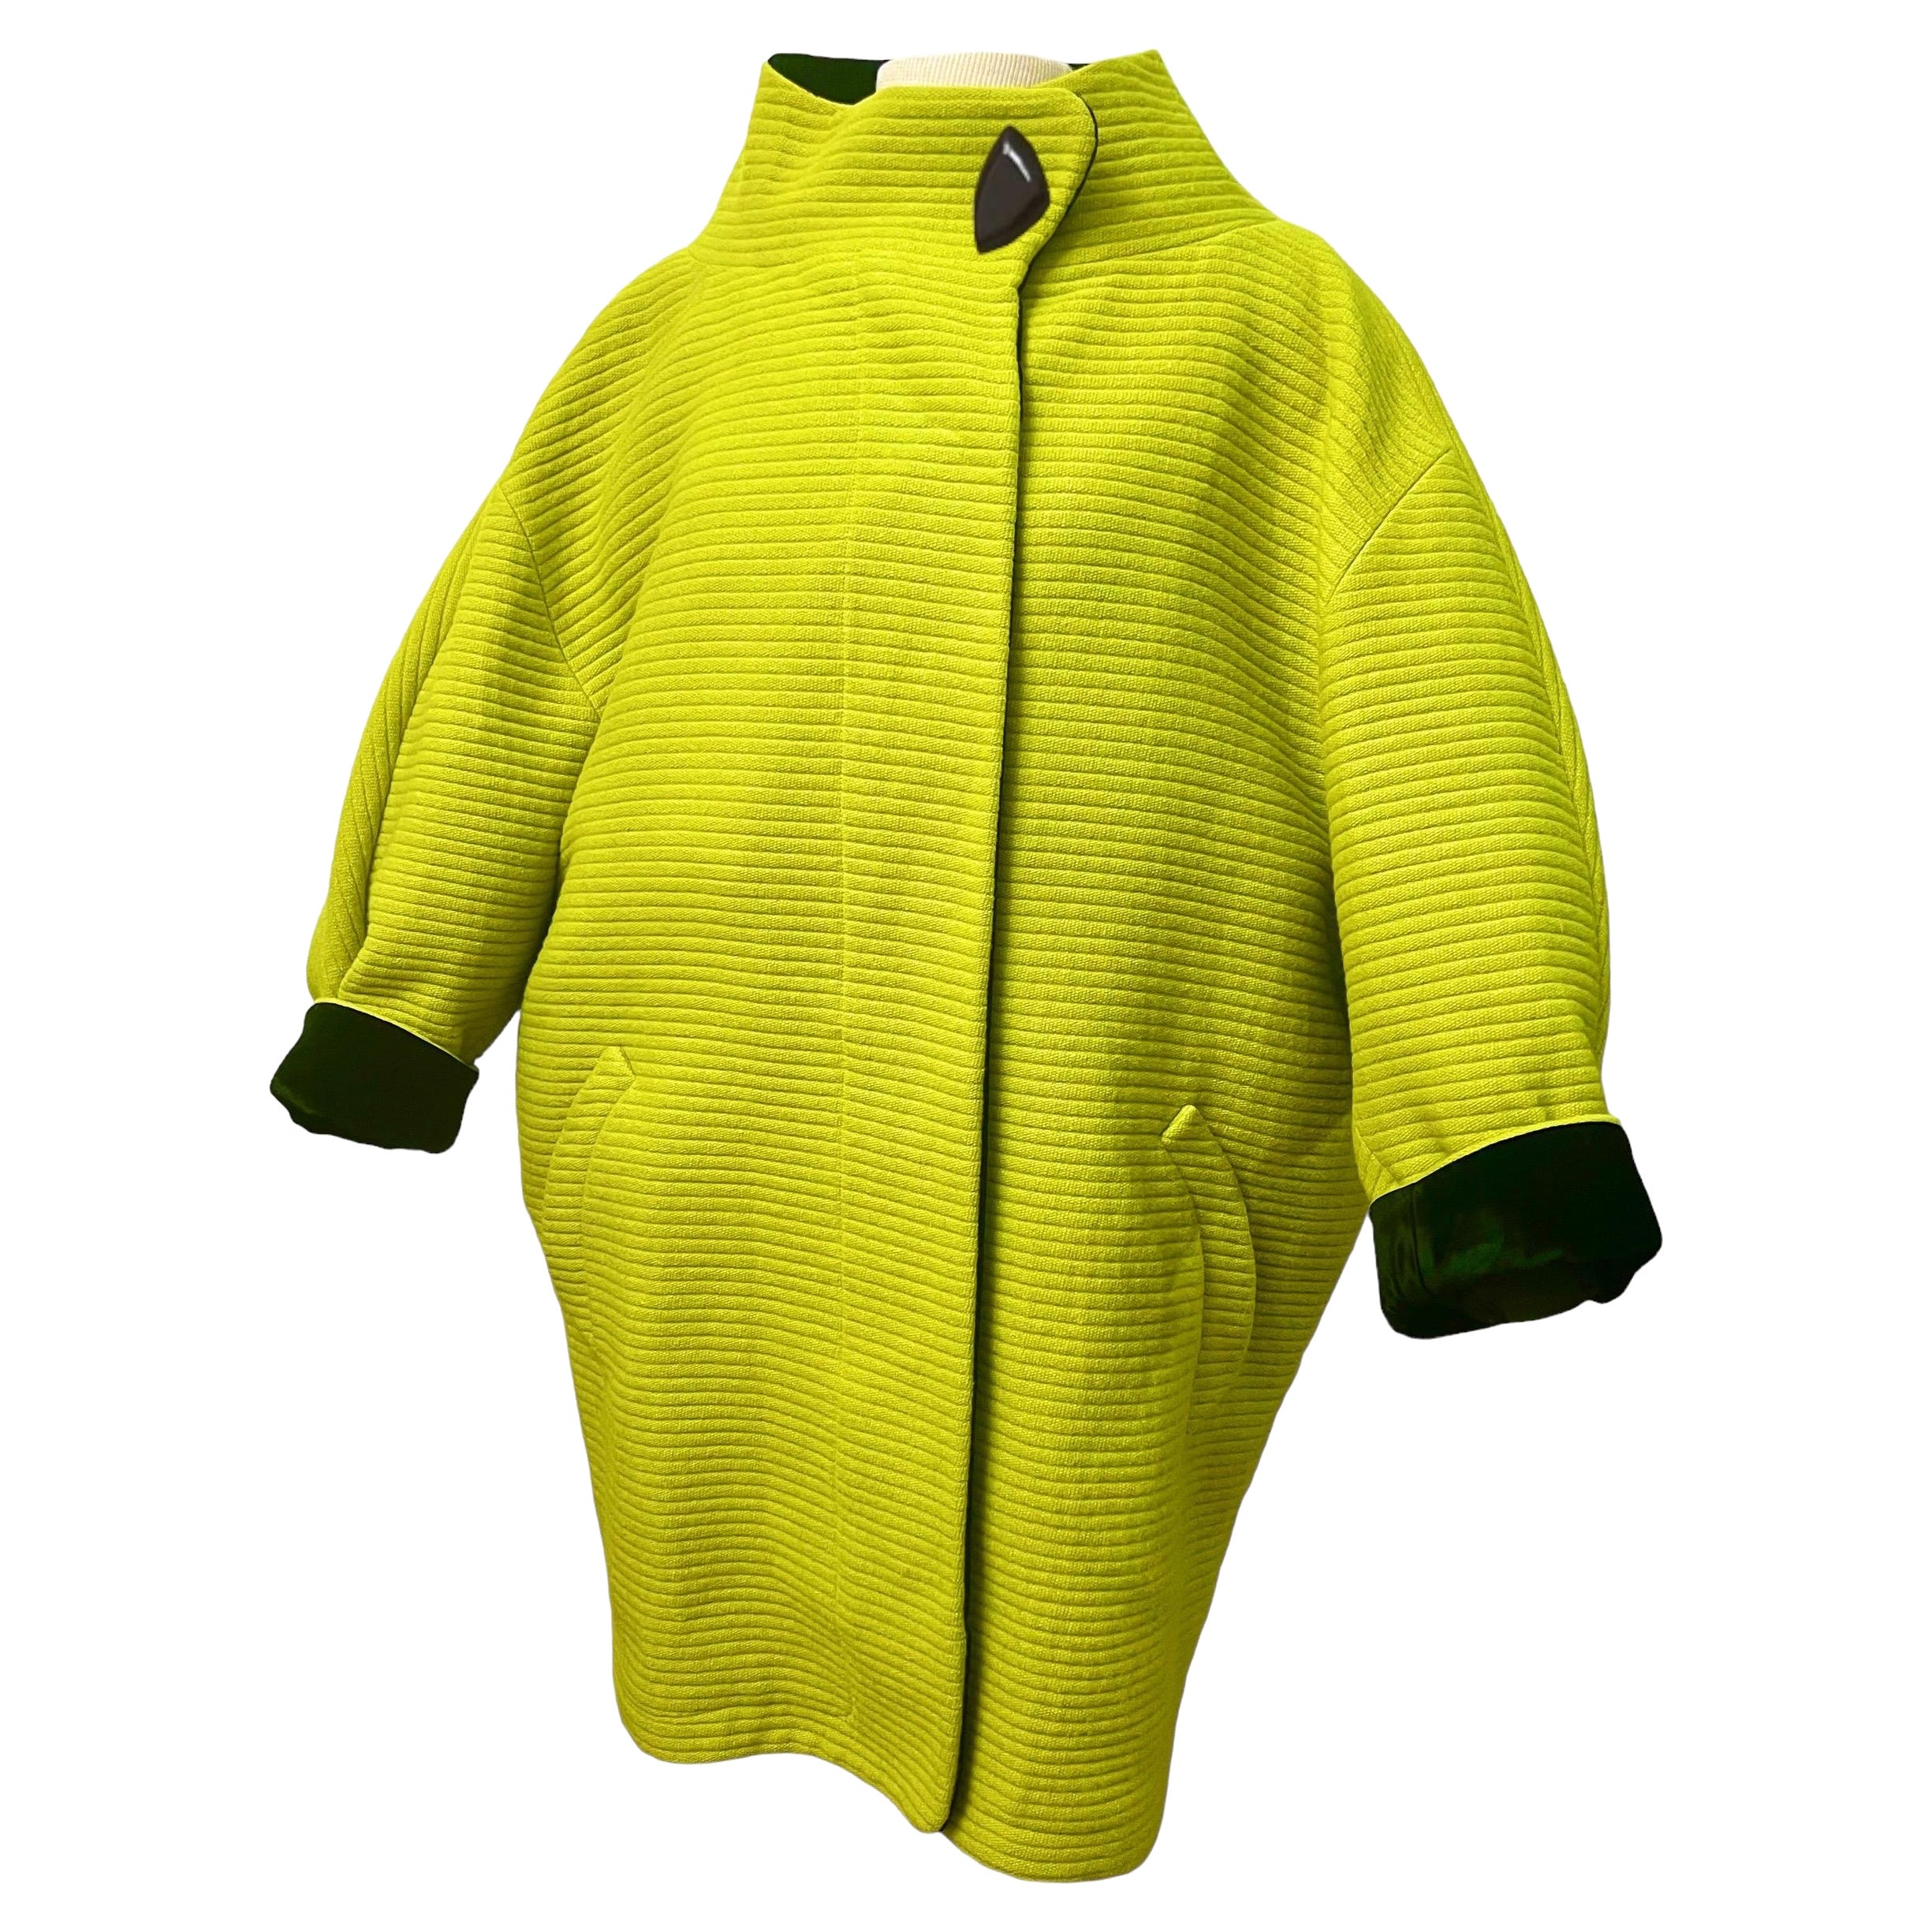 Create a statement with this jaw-dropping avant-garde wool cocoon coat by Thierry Mugler from Fall/Winter 1990. This incredibly rare vivid lime green coat boasts a futuristic design with a wide funnel stand up collar that creates a striking